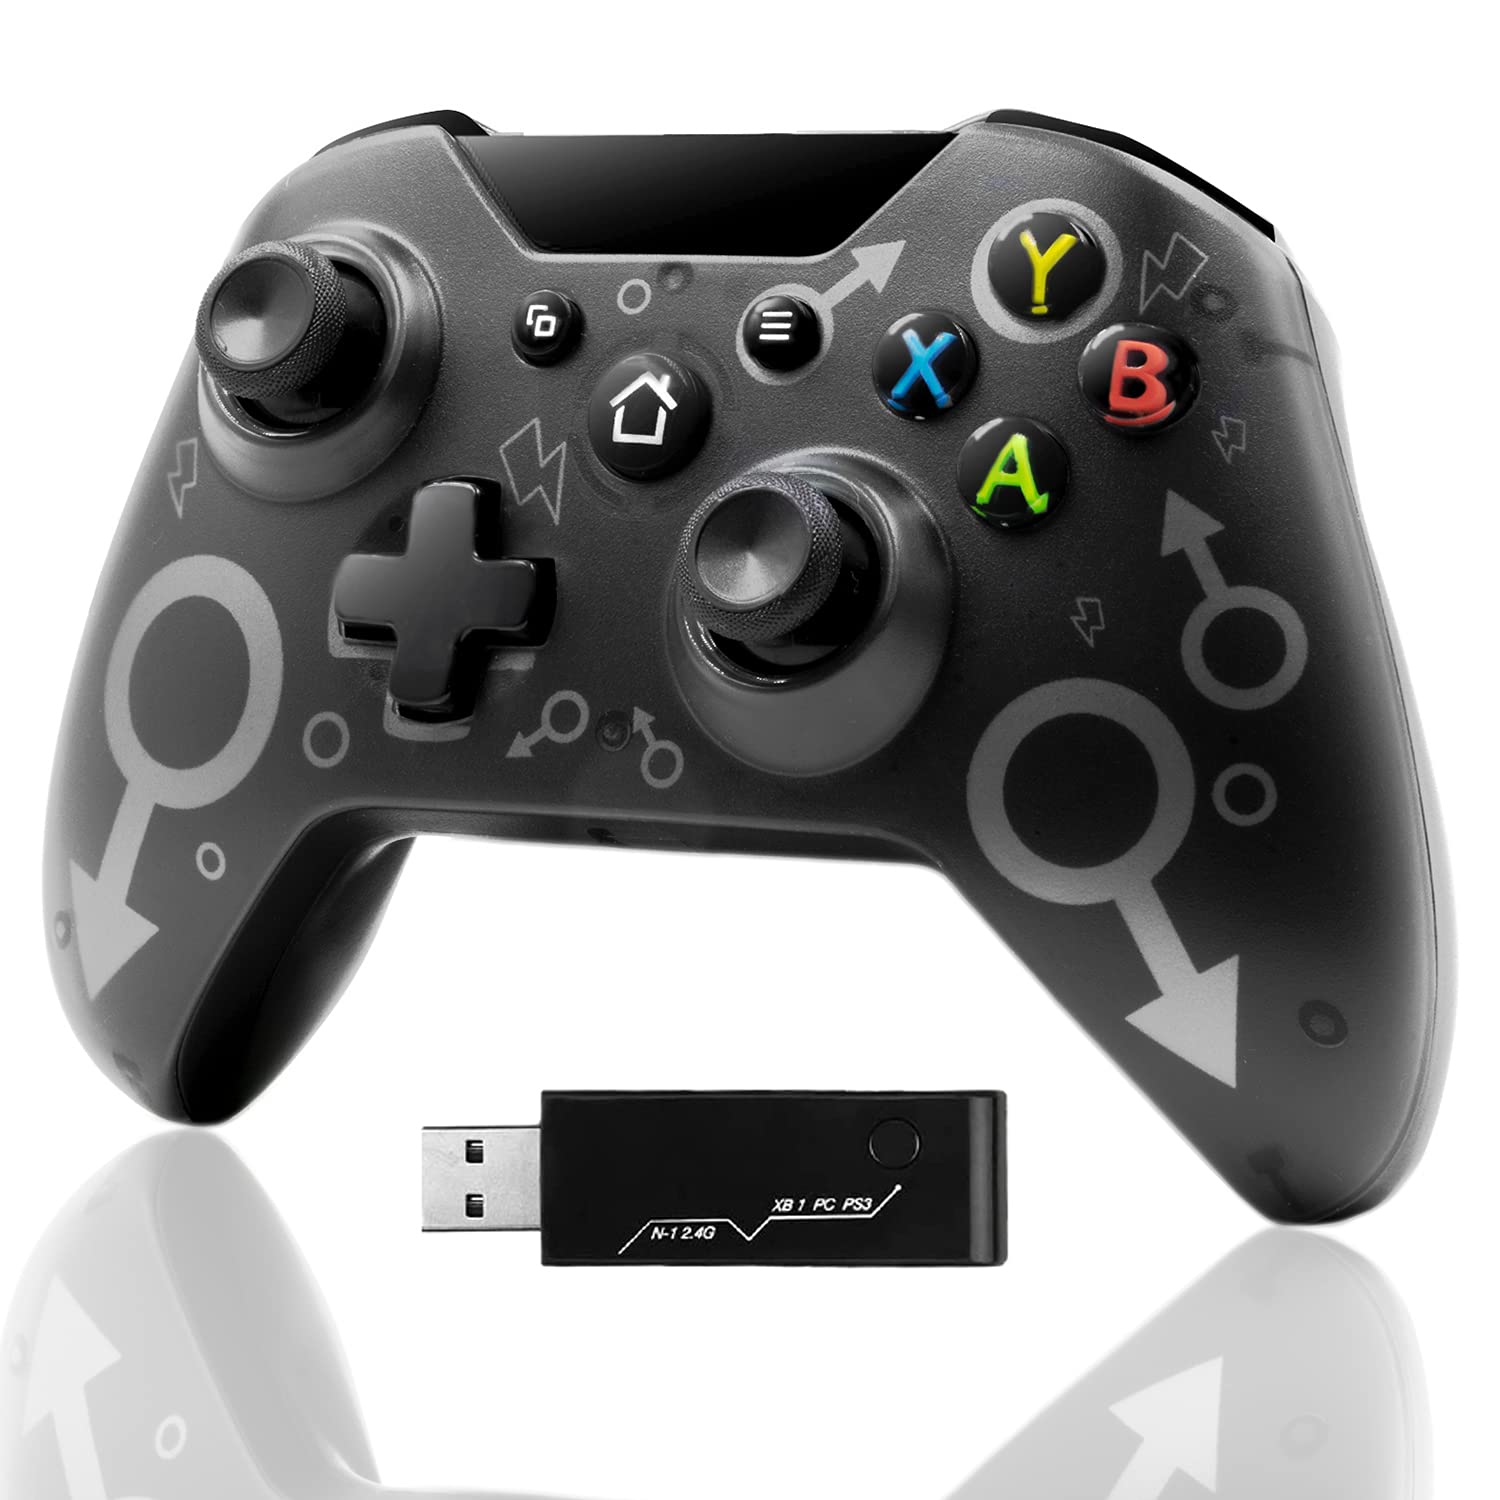 Xbox One controller with product overview details.